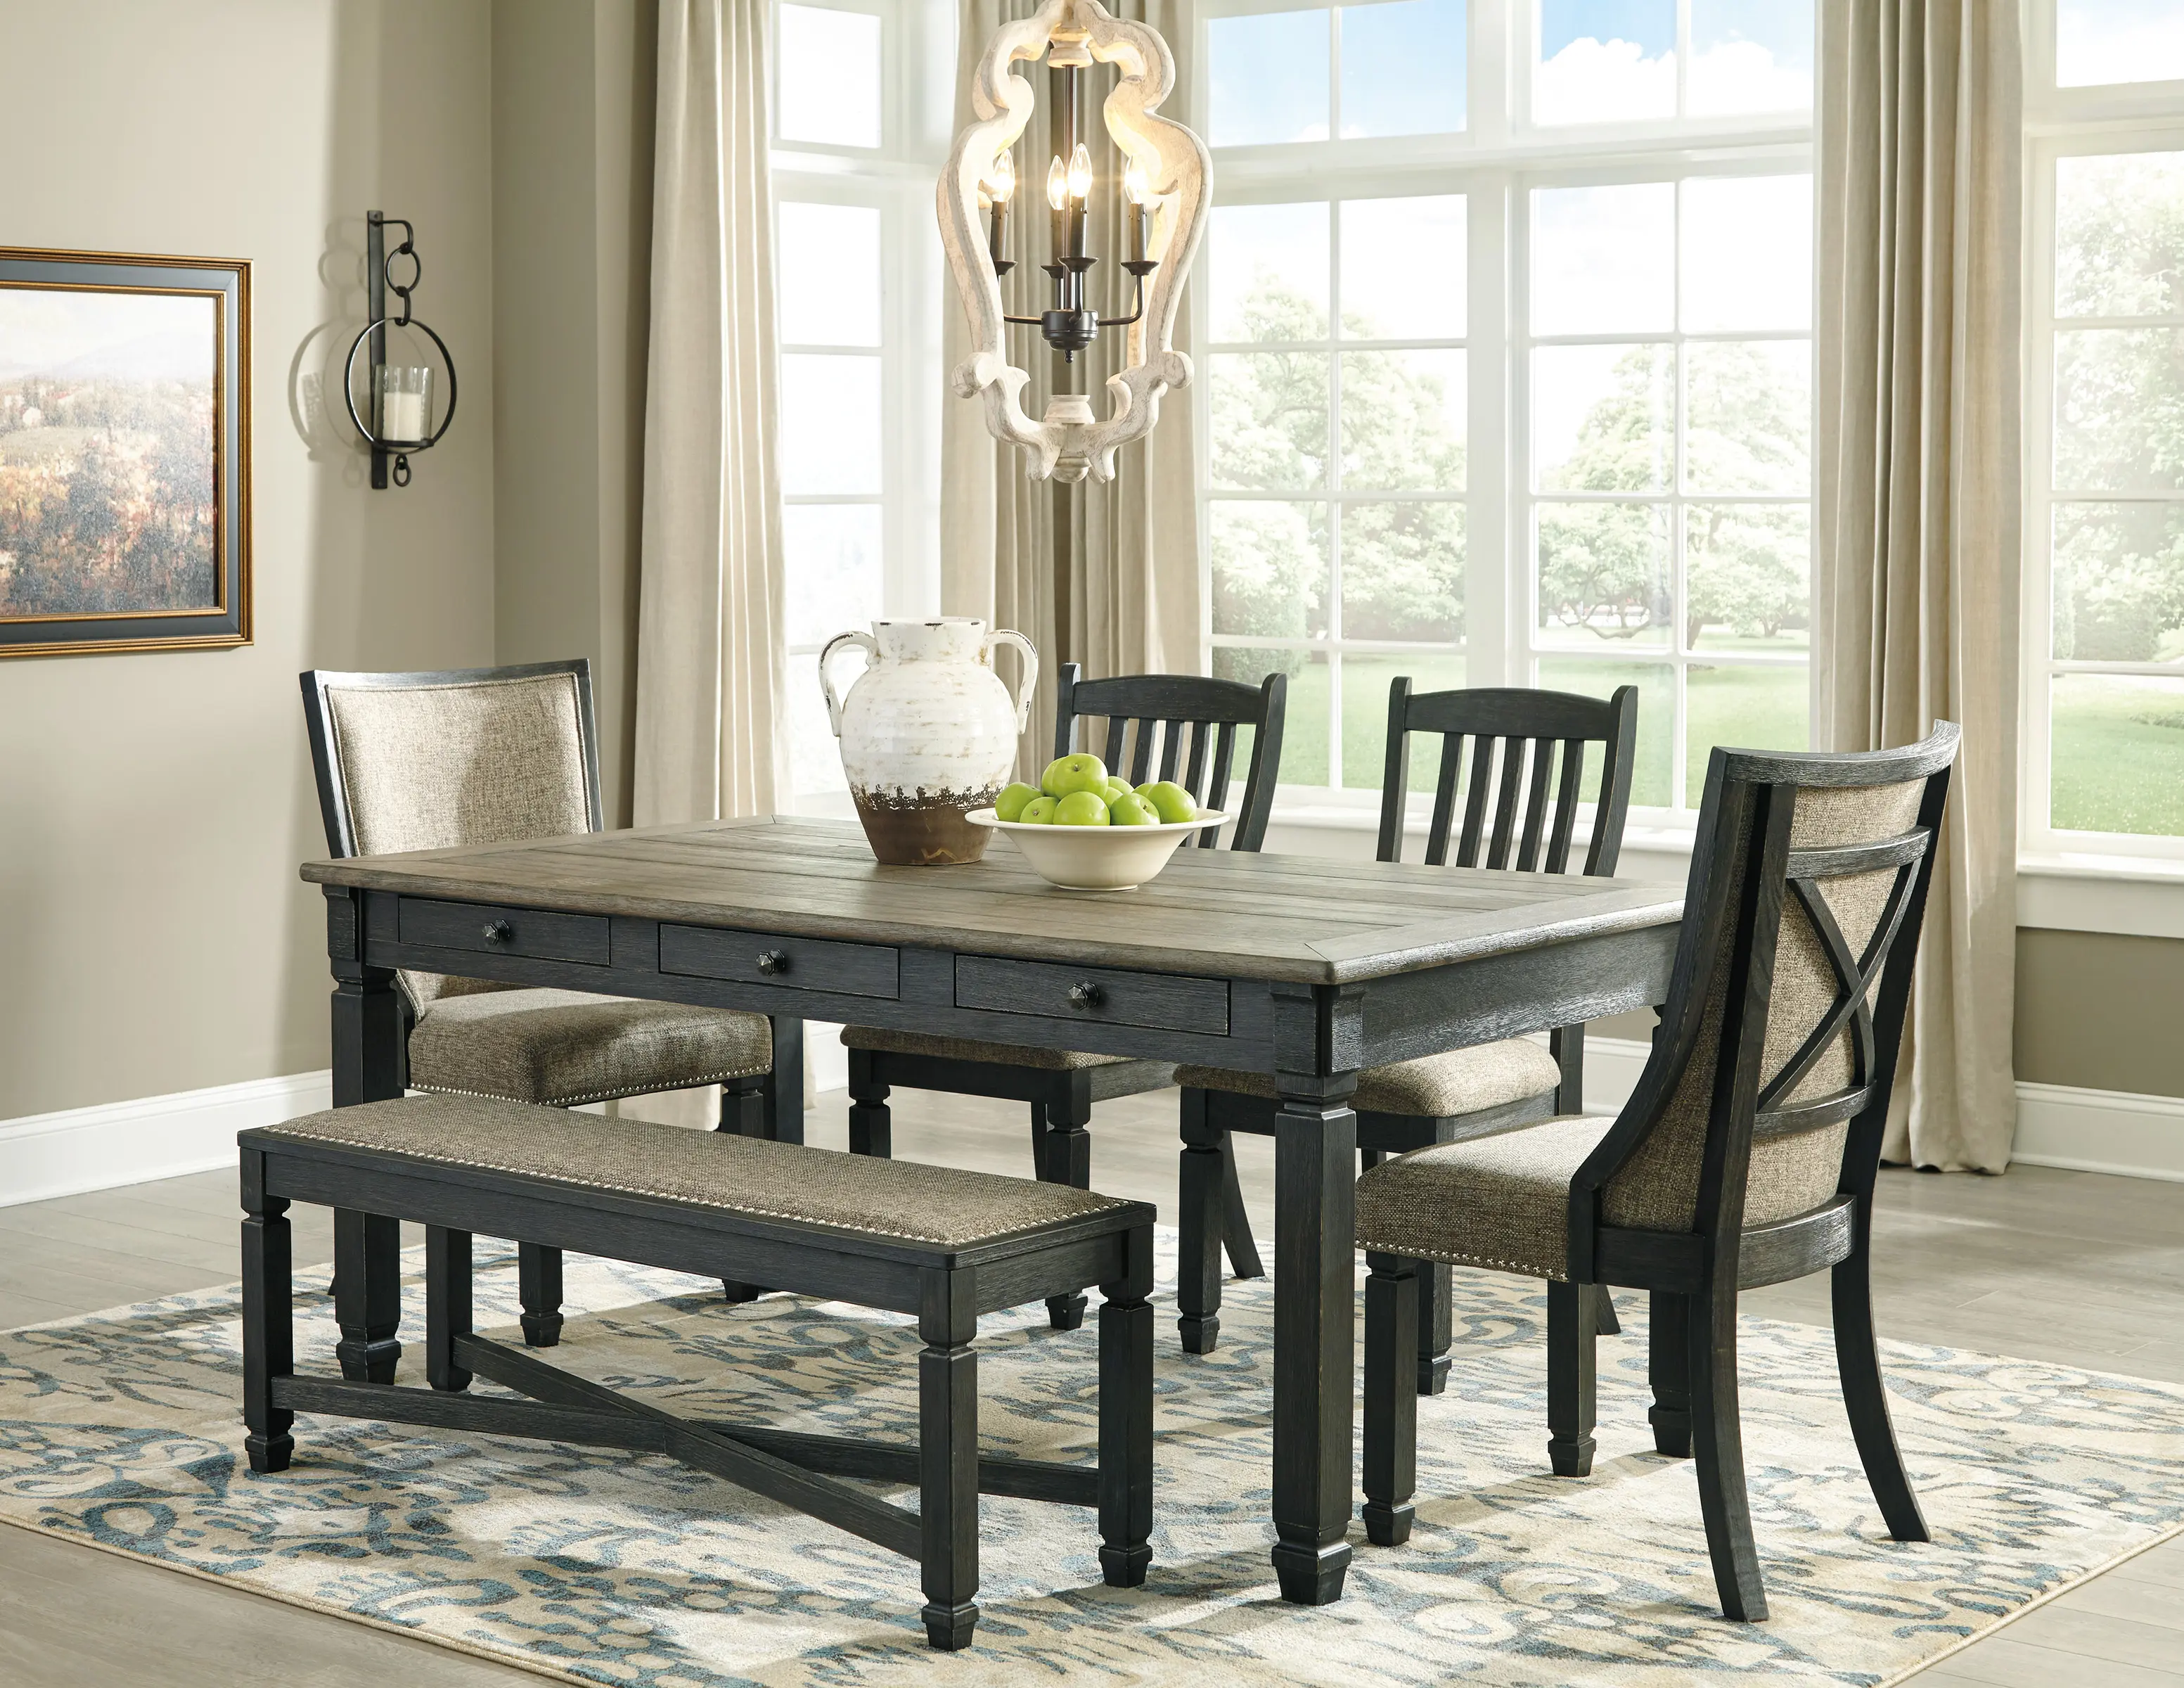 TYLER CREEK DINING TABLE AND CHAIRS WITH BENCH(SET OF 6)